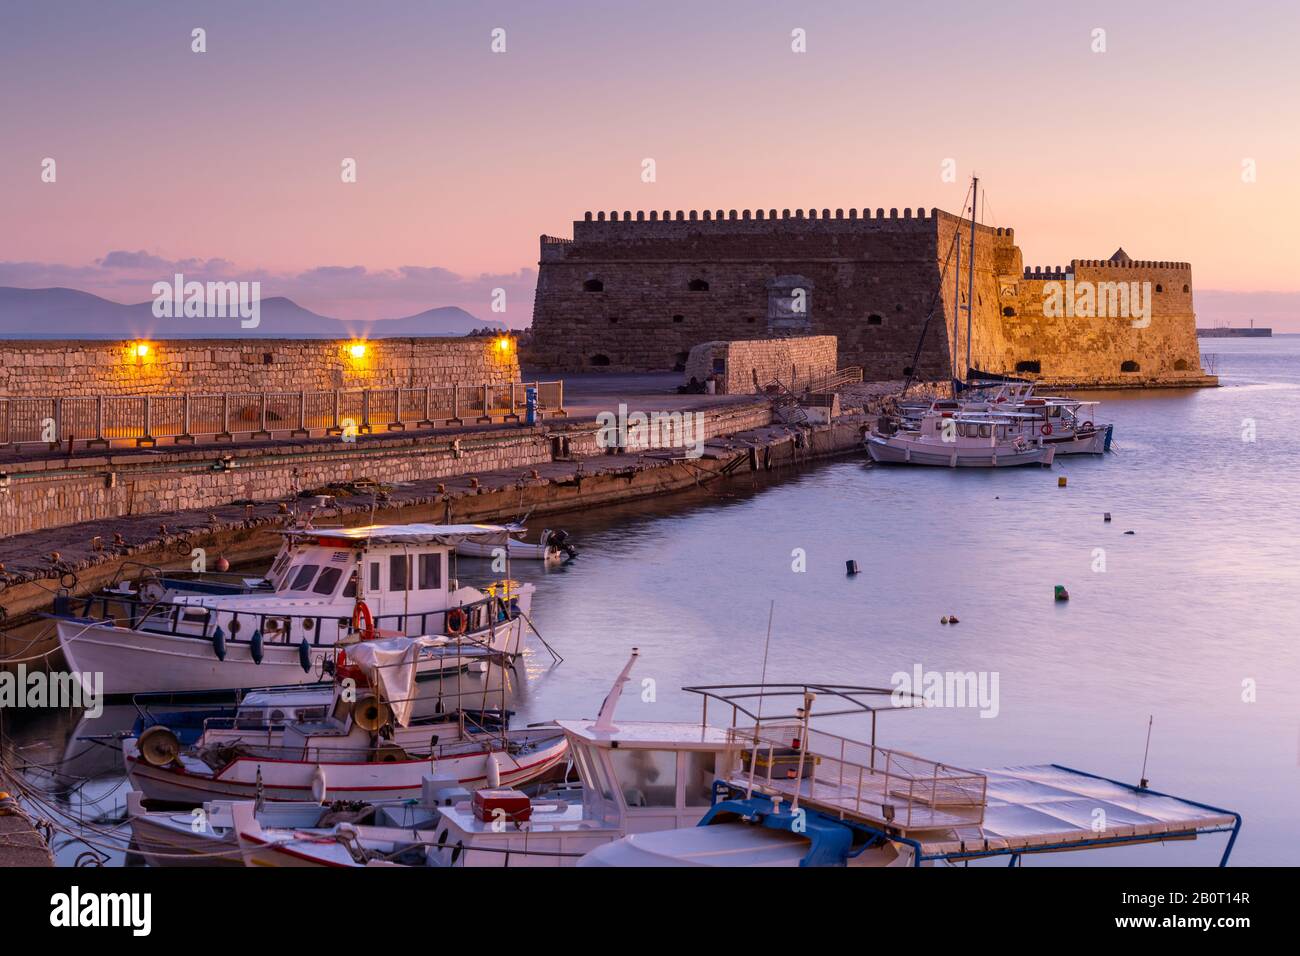 Venetian fortress in the old harbour of Heraklion in Crete, Greece. Stock Photo